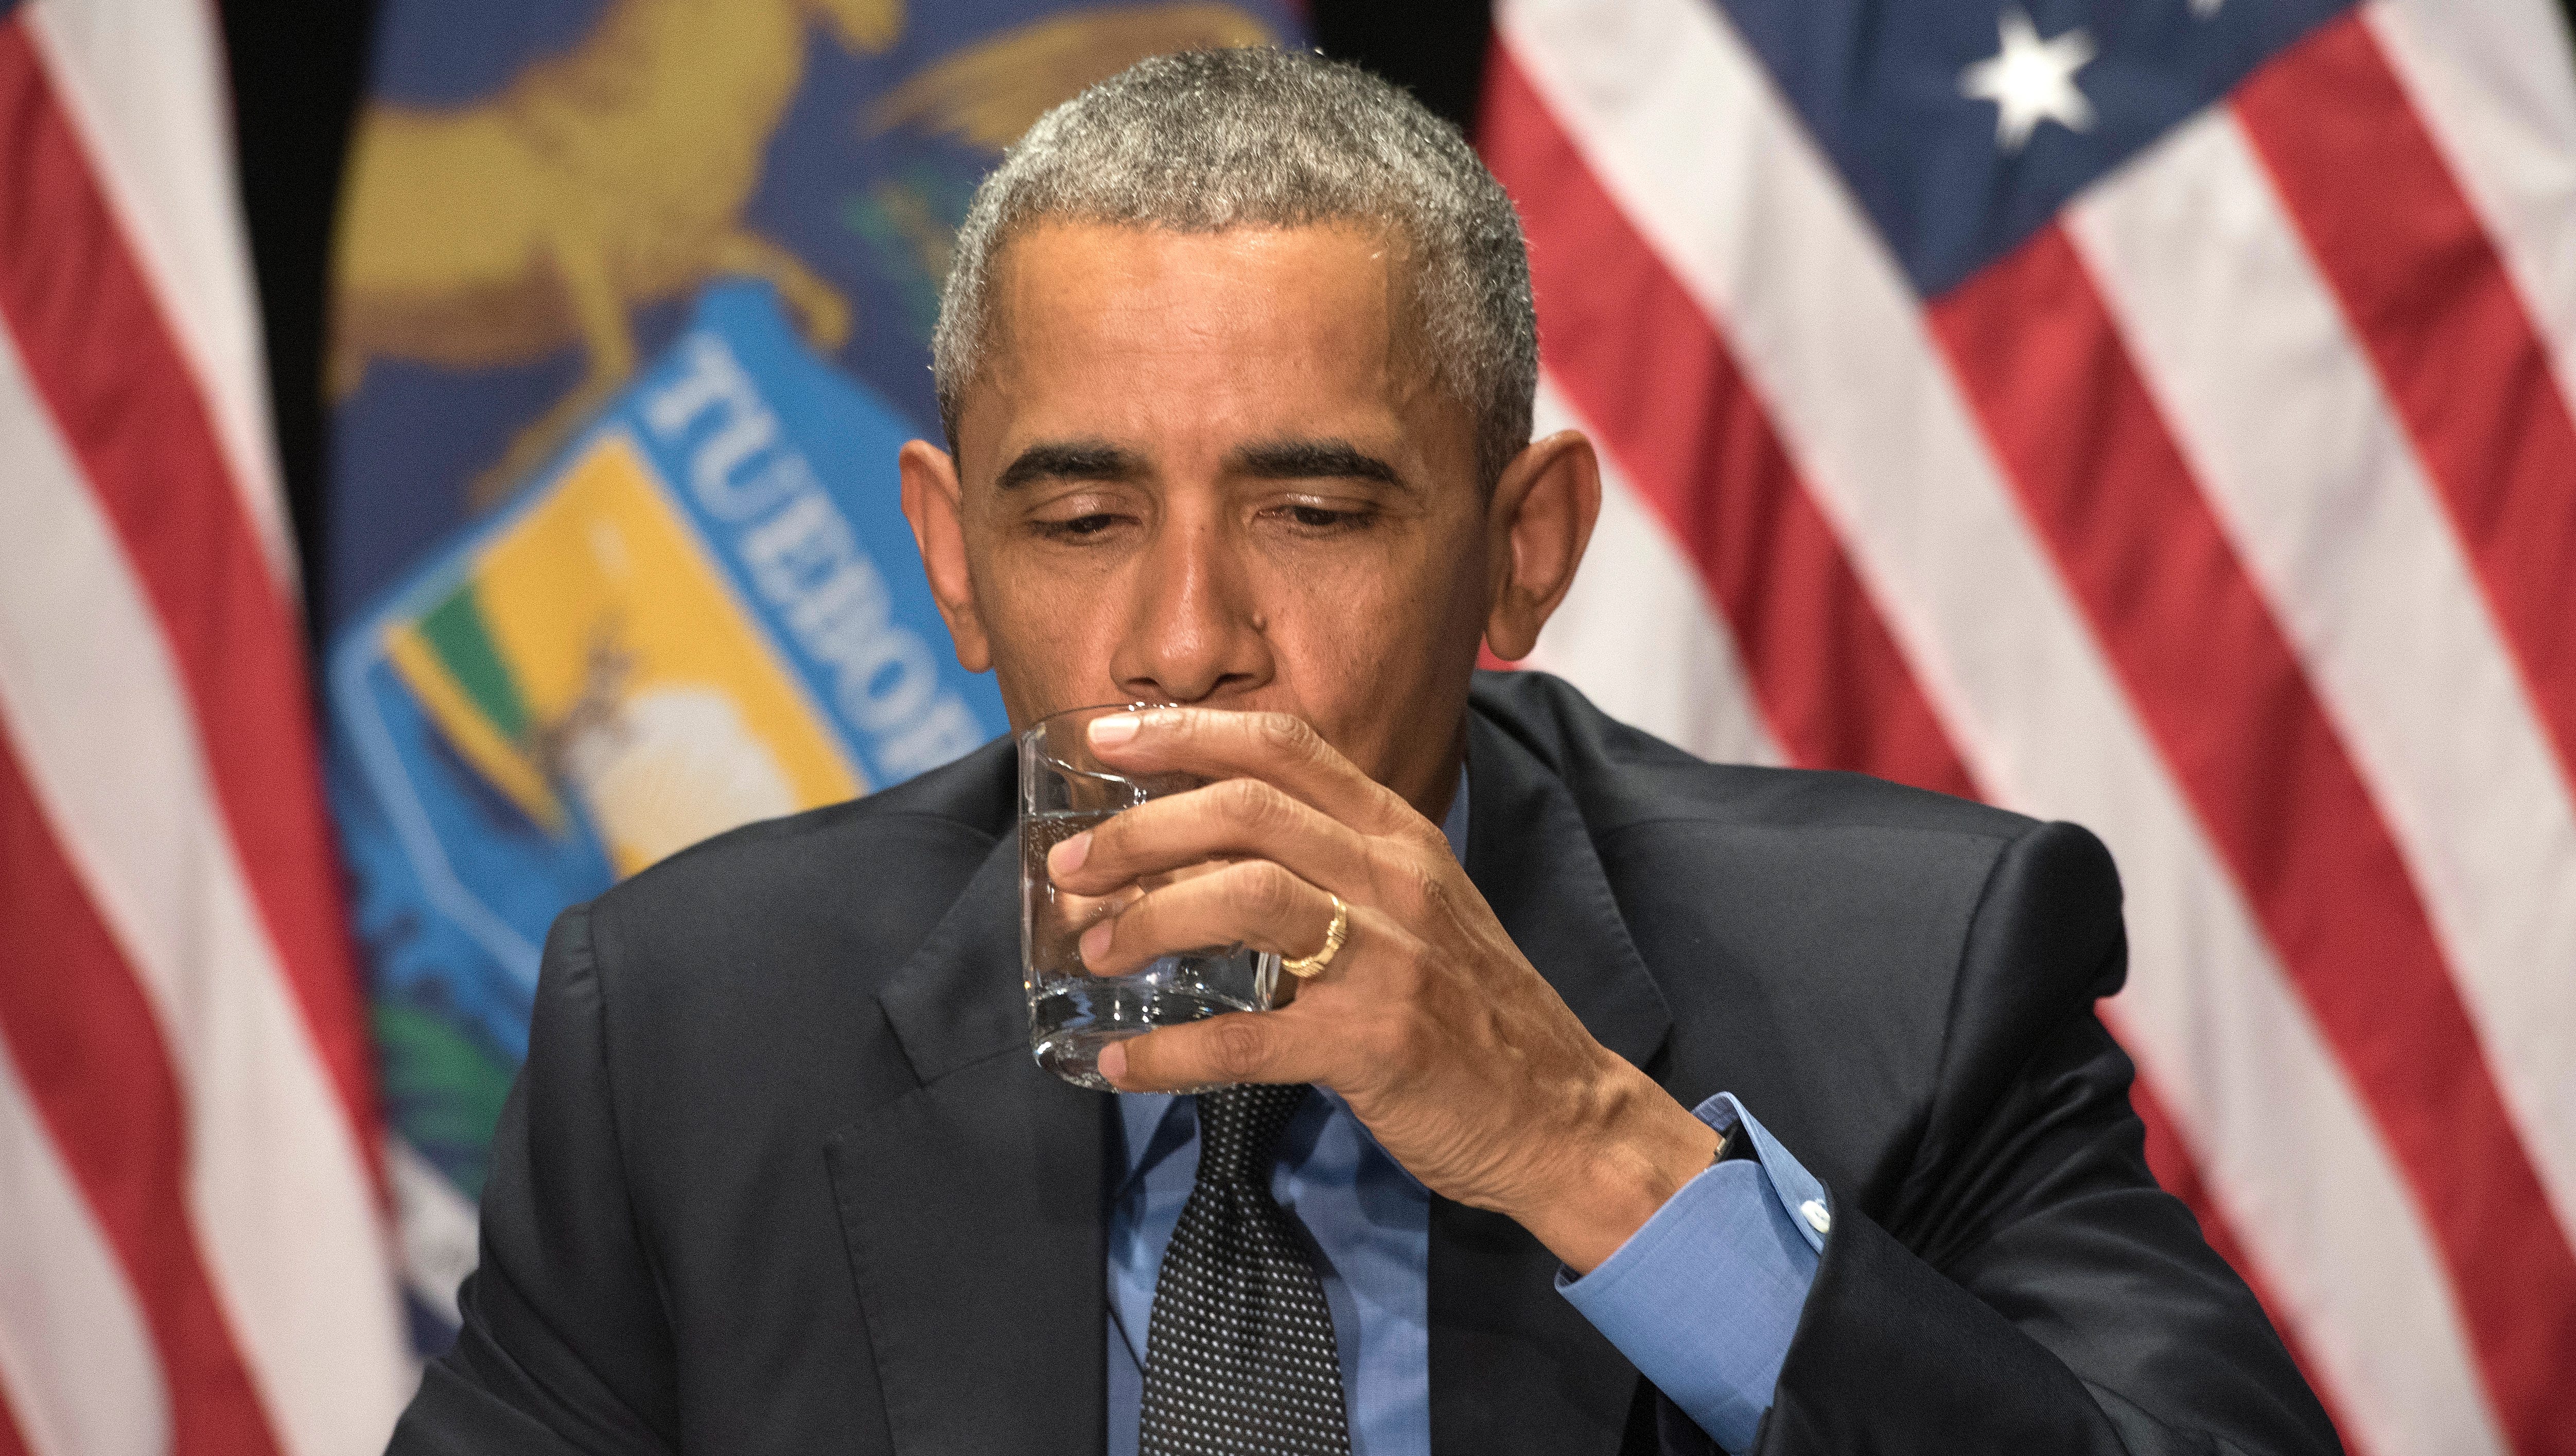 The president vouched for the safety of certified filters and encouraged most city residents to start drinking filtered water instead of bottled water.